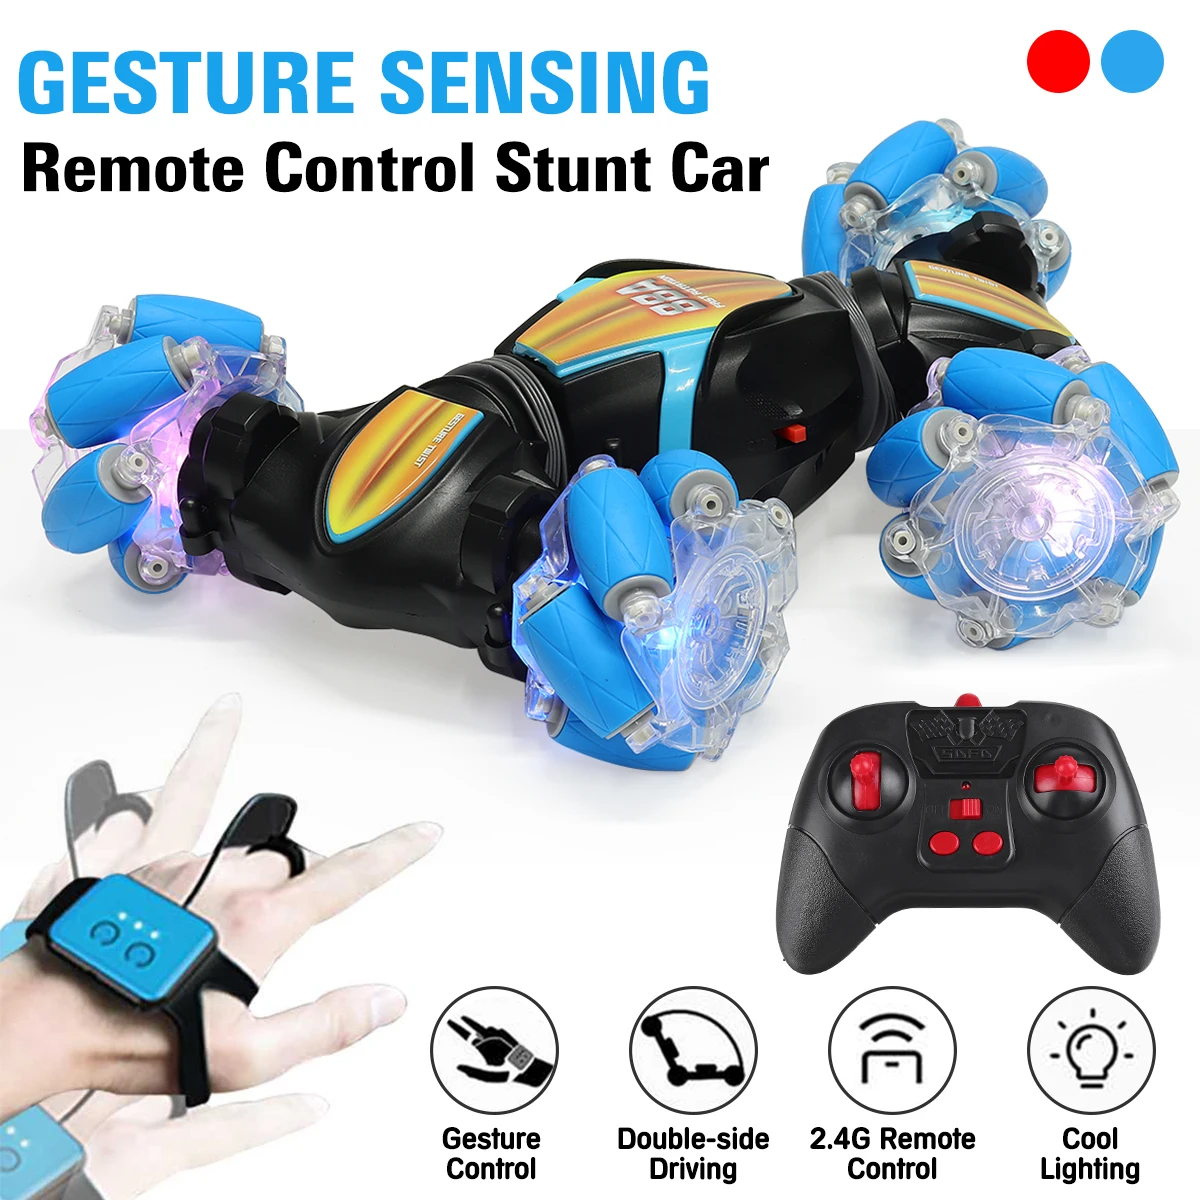 2.4G 4WD Gesture Sensing Car Remote Control Stunt Car 360° All-Round Drift Twisting Off-Road Dancing Vehicle Kids Toys W/ Lights